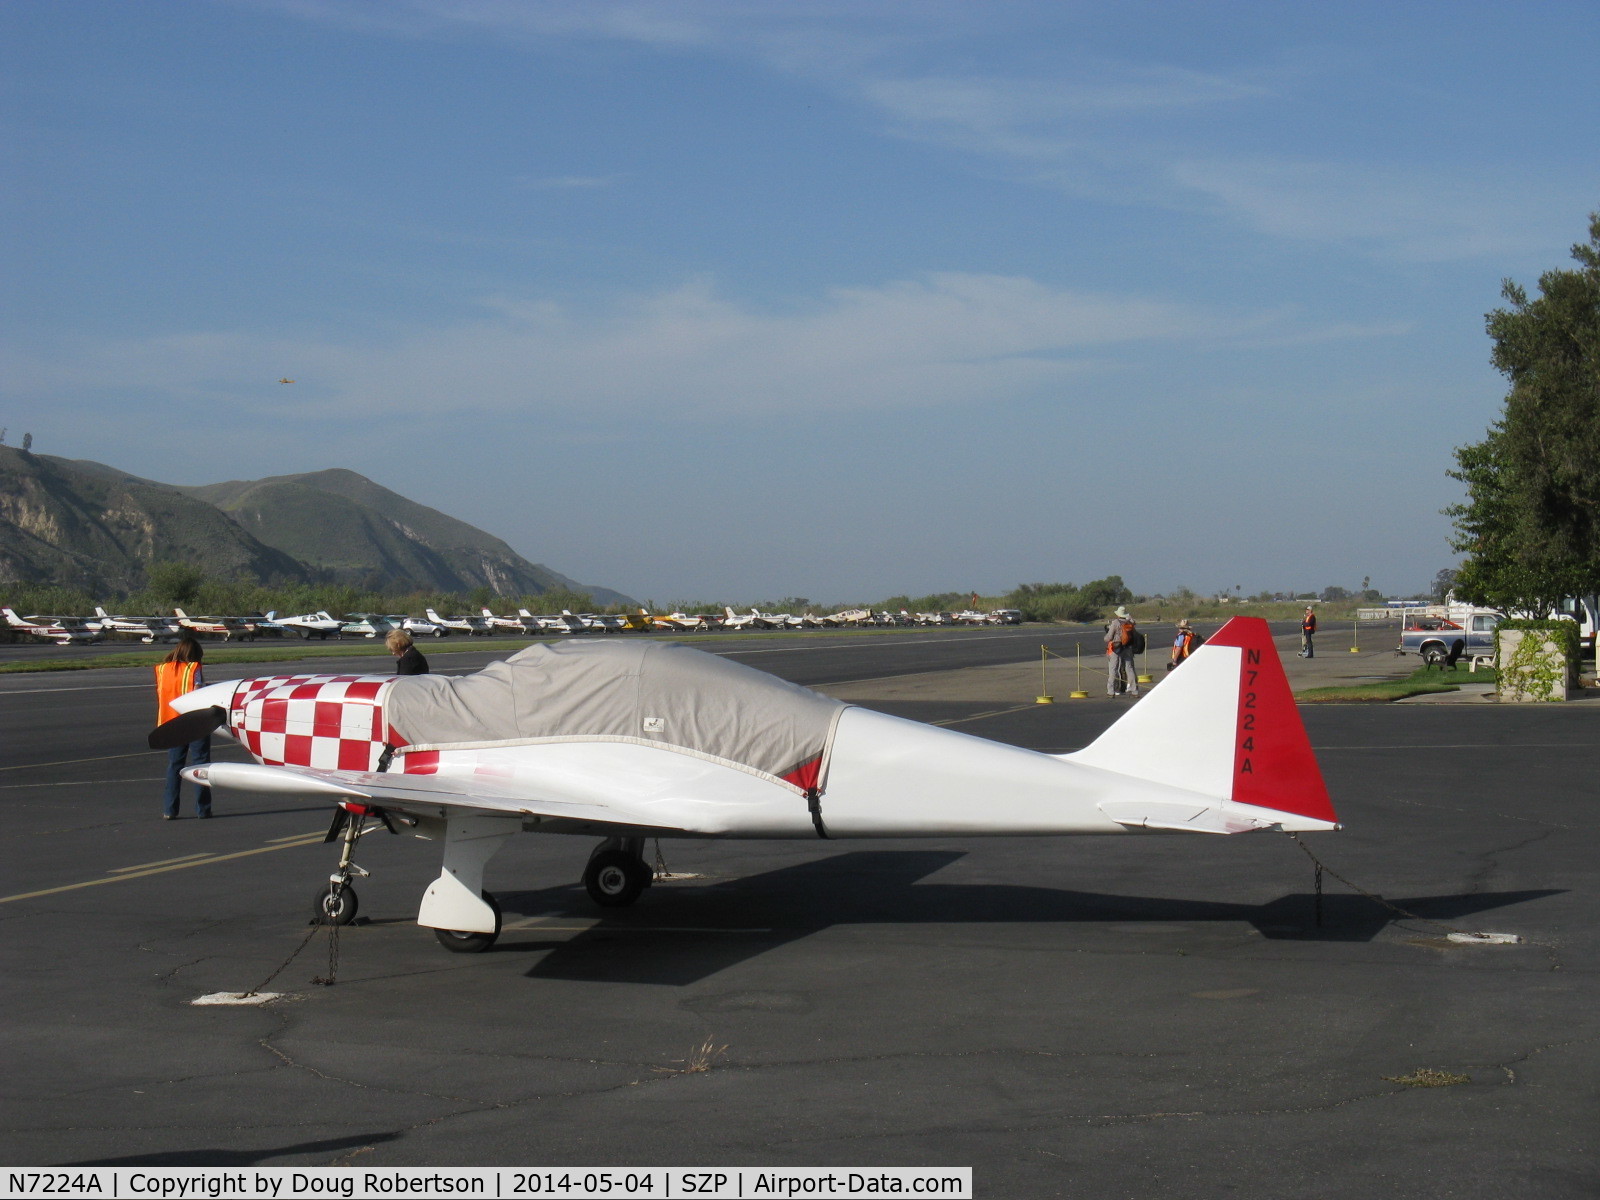 N7224A, 1998 Osprey GP-4 C/N 8, 1998 Baum PEREIRA GP4, Lycoming IO-360-A1A 210 Hp, wood plans-built rare speedster, 240 mph cruise, 2,200 fpm climb rate, 1,200 mile range, two place, retractable gear